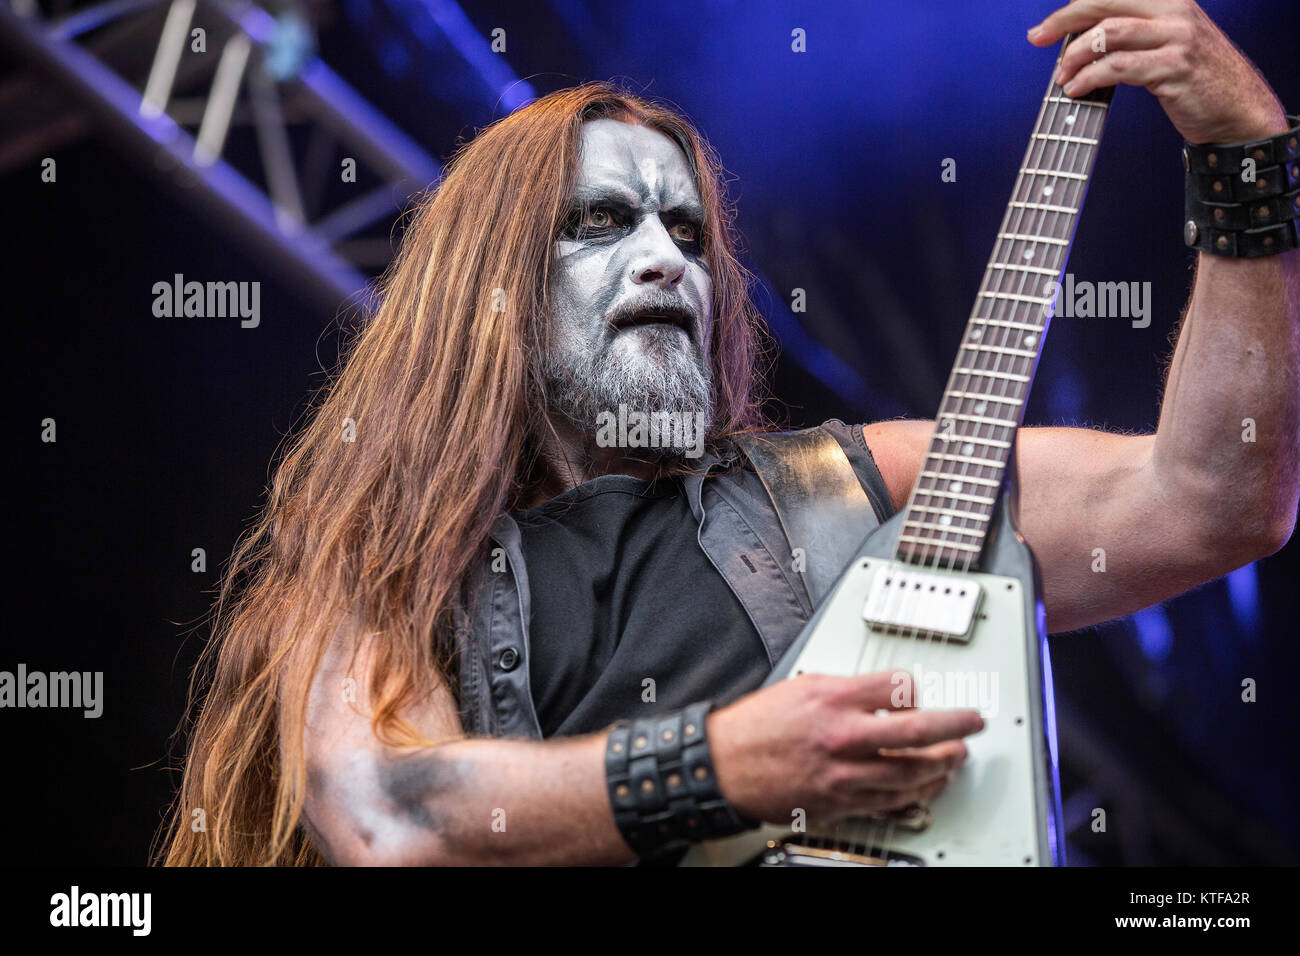 Norway, Borre – August 18, 2017. The Norwegian black metal band Gaahls Wyrd performs a live concert during the Norwegian metal festival Midgardsblot Festival 2017 in Borre.(Photocredit: Terje Dokken). Stock Photo